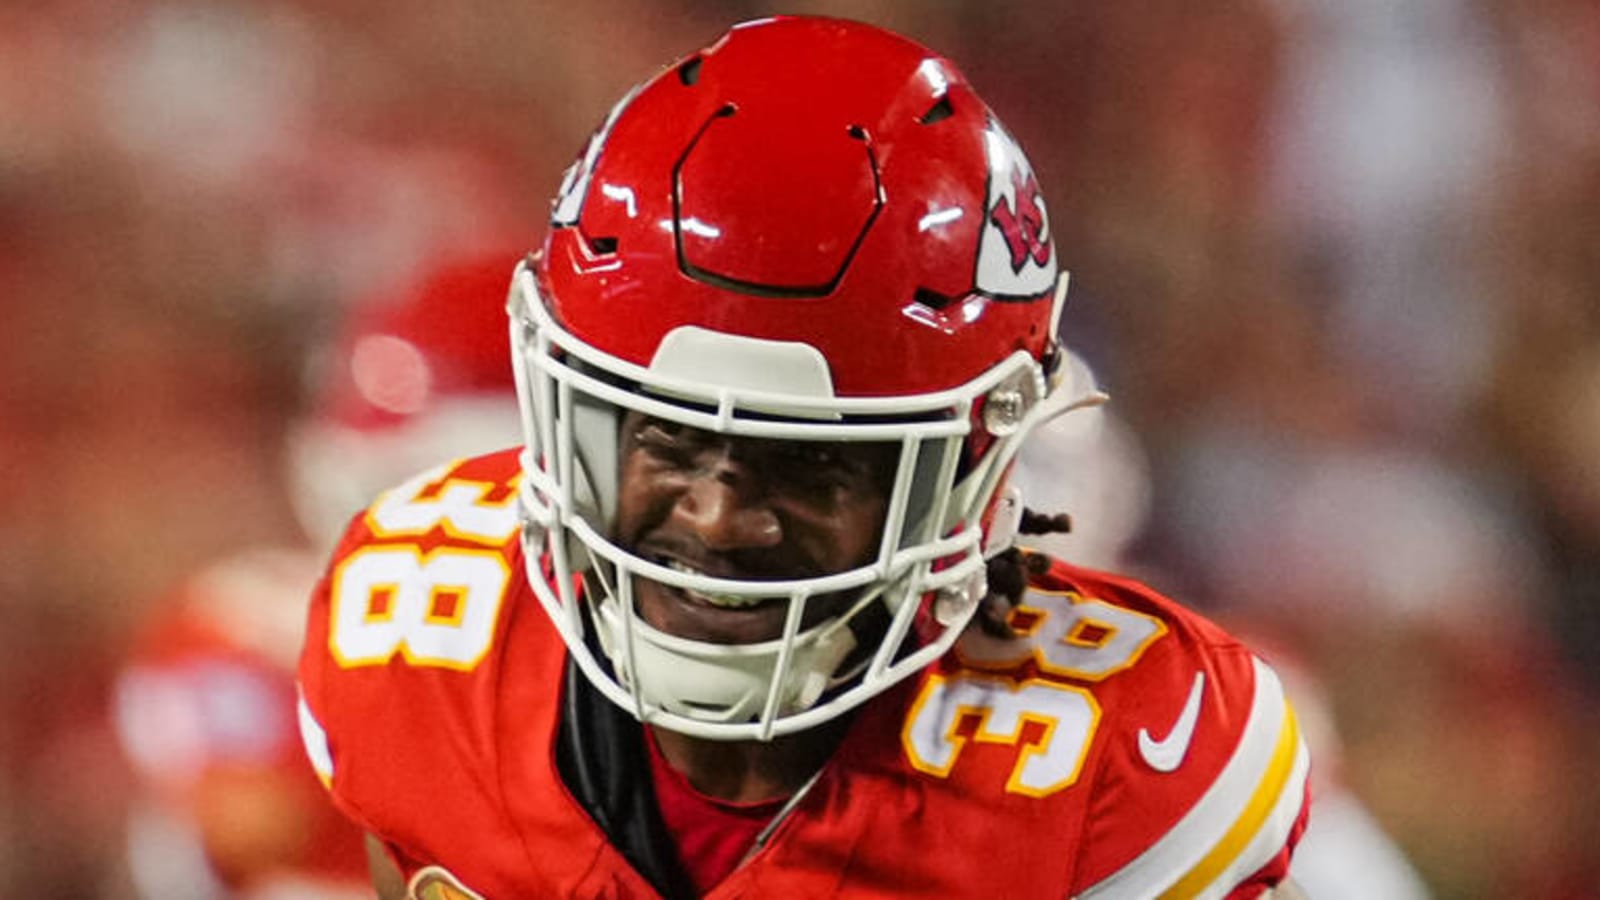  Kansas City Chiefs Trade Of Star Player To AFC Rival To Save $19.8 Million Has Fans On Edge